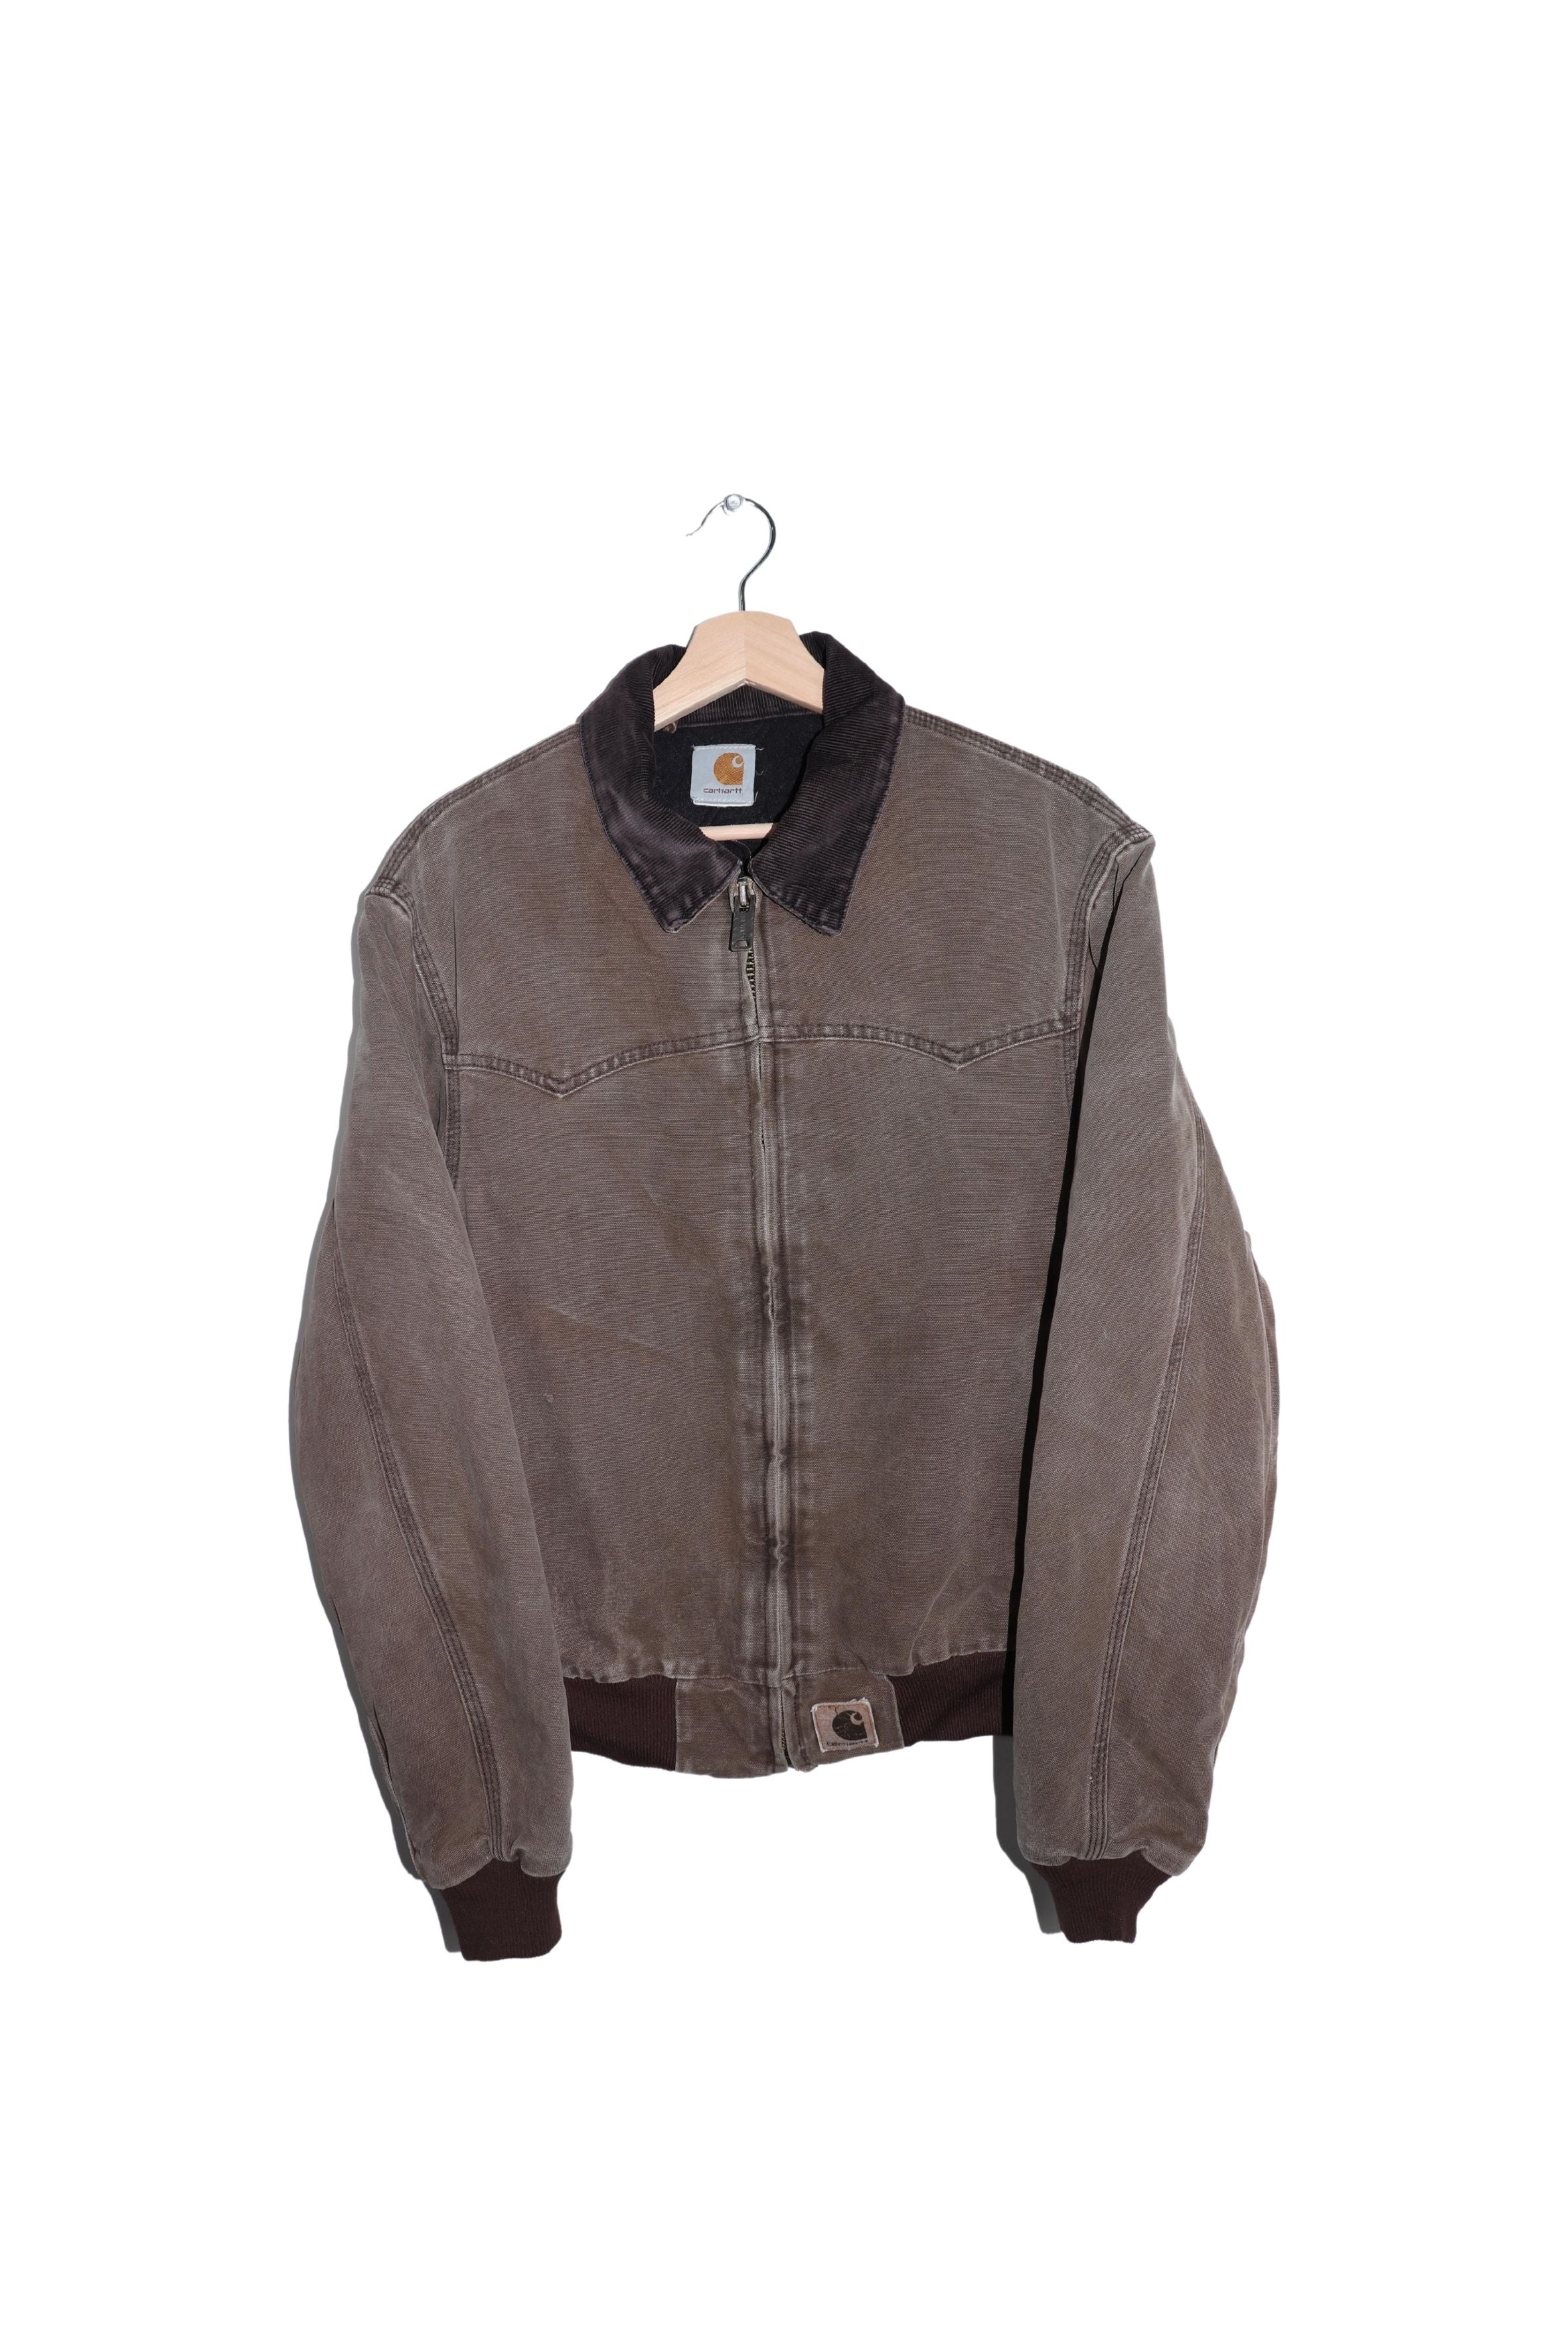 Vintage Carhartt Corduroy Collared Faded Brown Thick Trucker Jacket